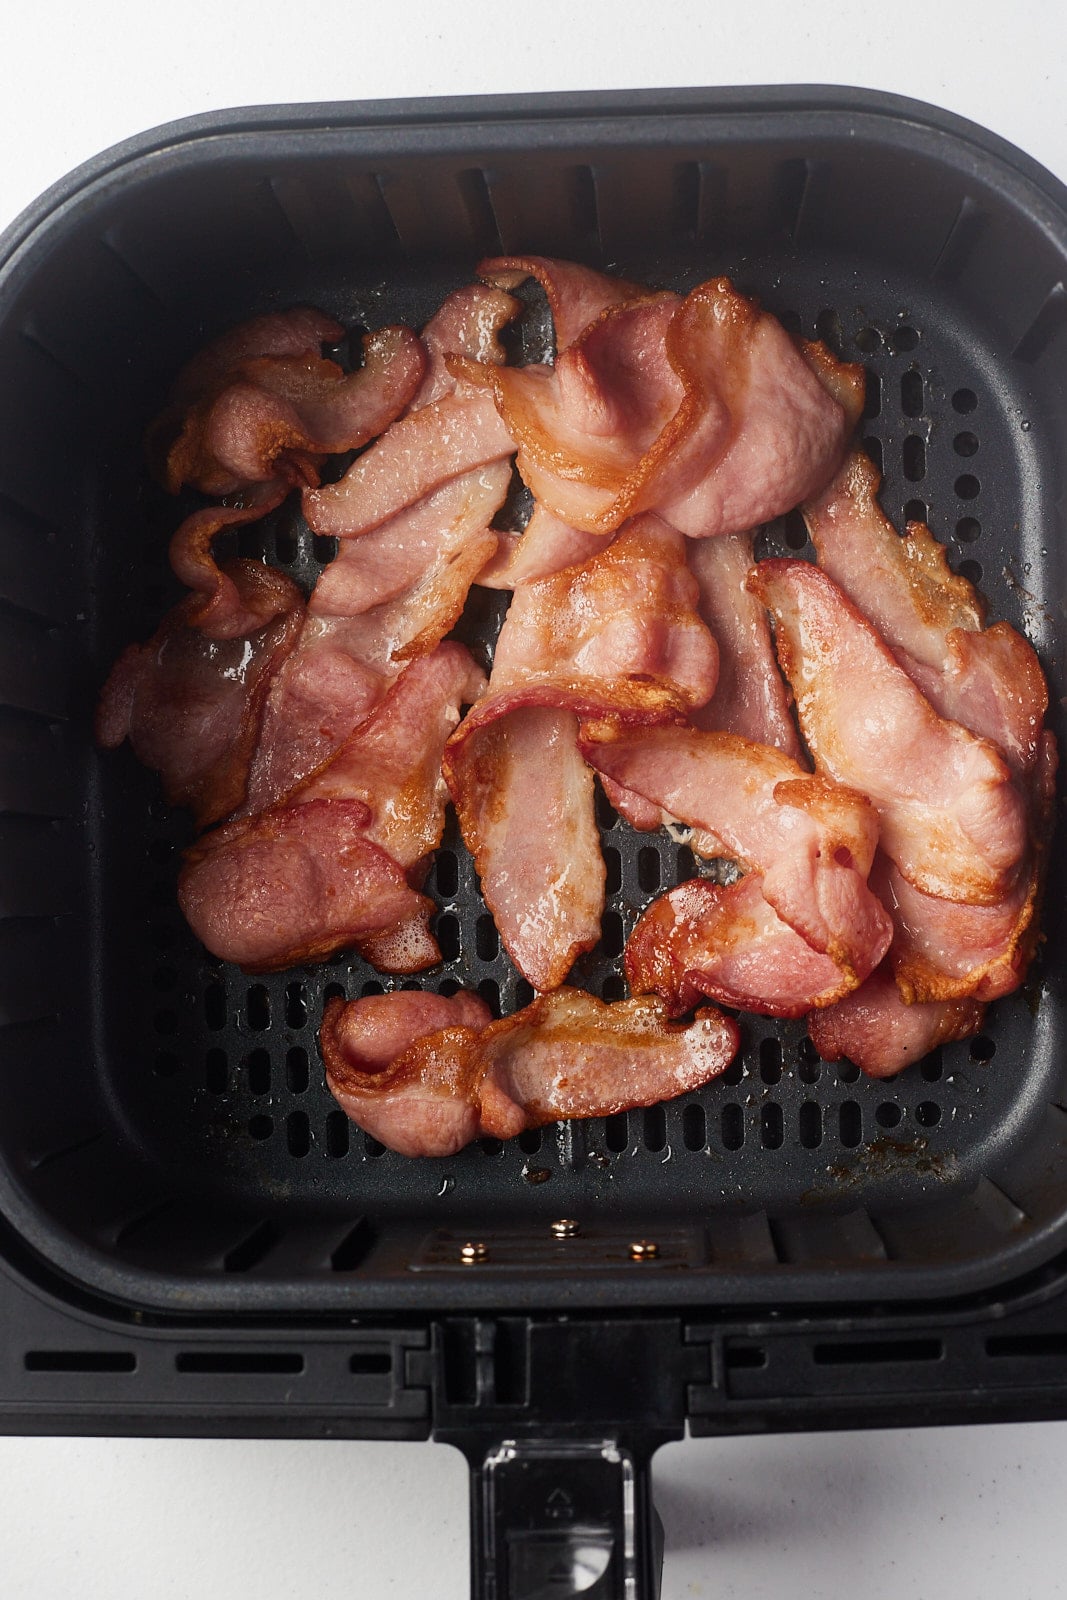 Cooking Bacon in Air Fryer (Tips & Tricks!) - Everyday Family Cooking